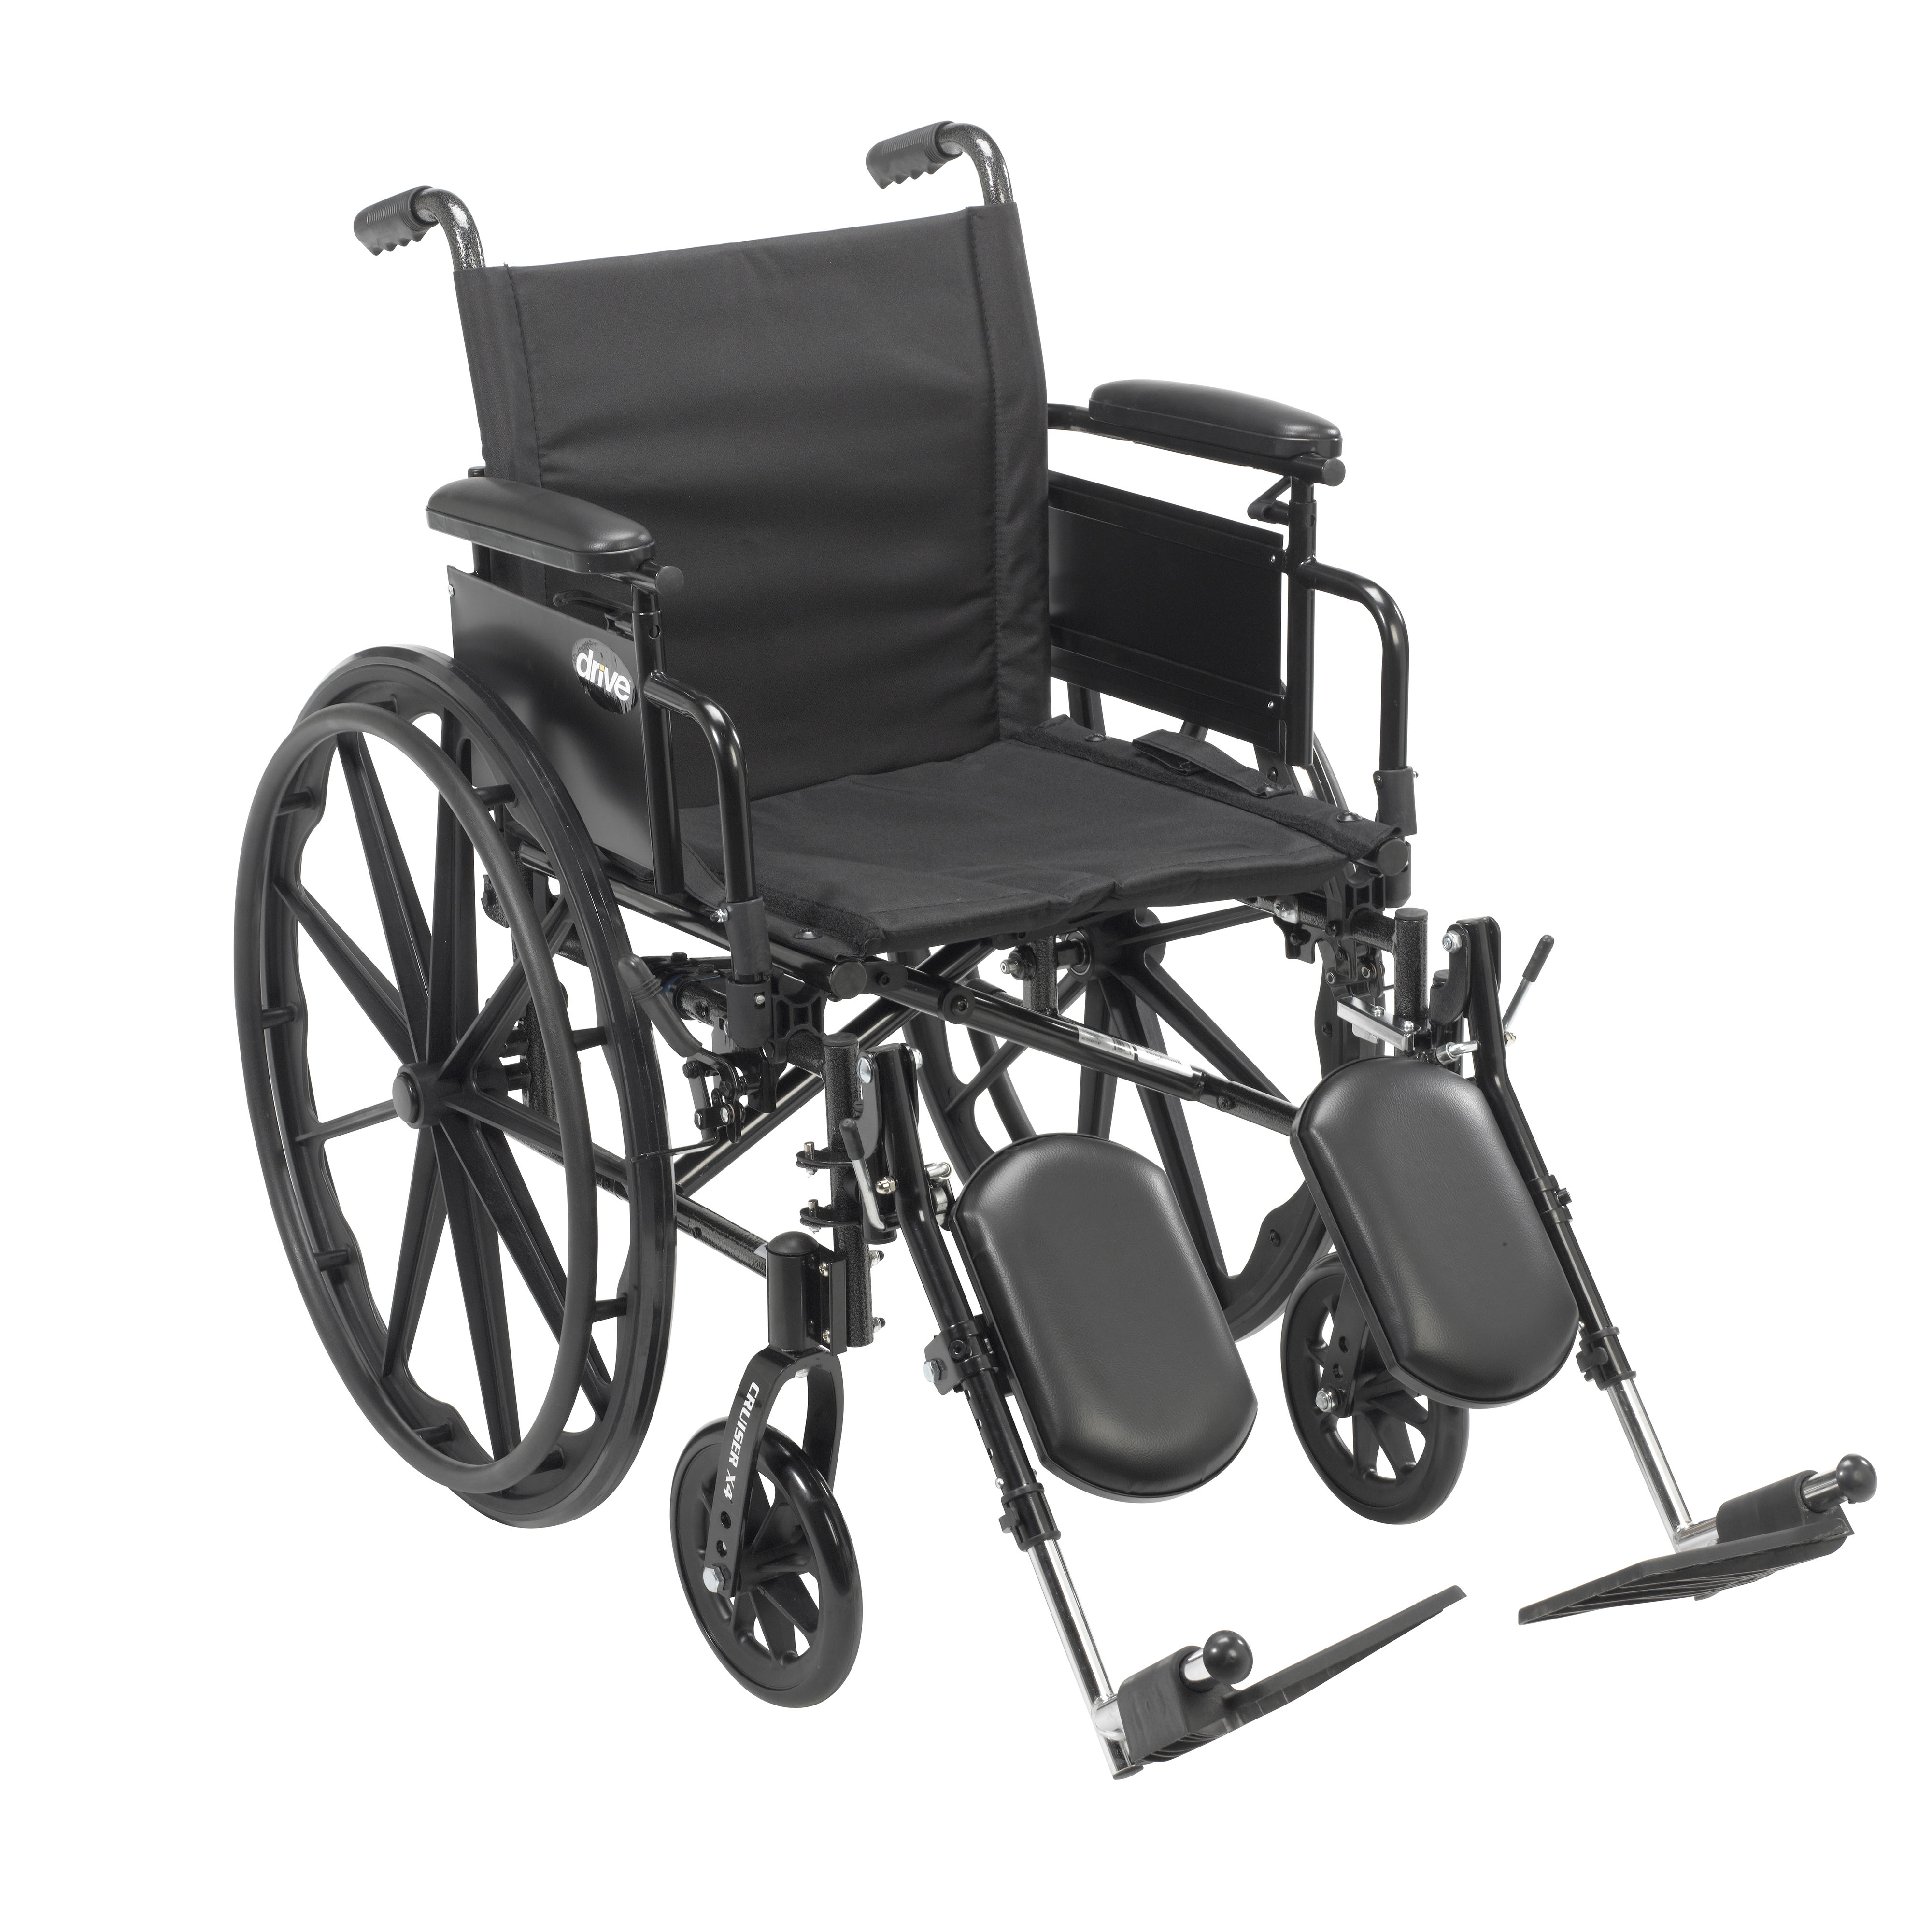 Wheelchairs: Lightweight with elevating leg rests